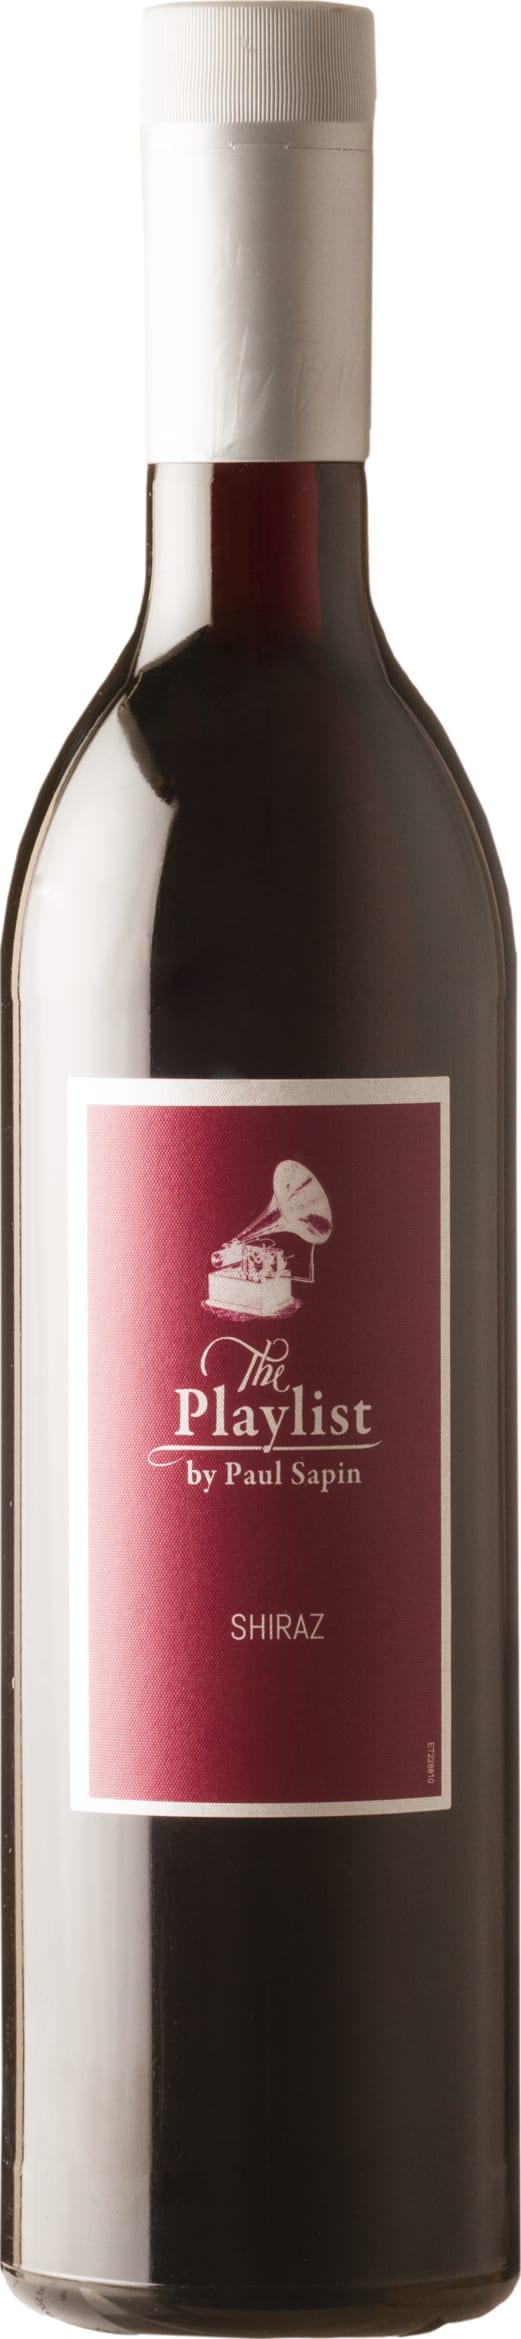 Shiraz PET NV Playlist 75cl NV - Buy Playlist Wines from GREAT WINES DIRECT wine shop